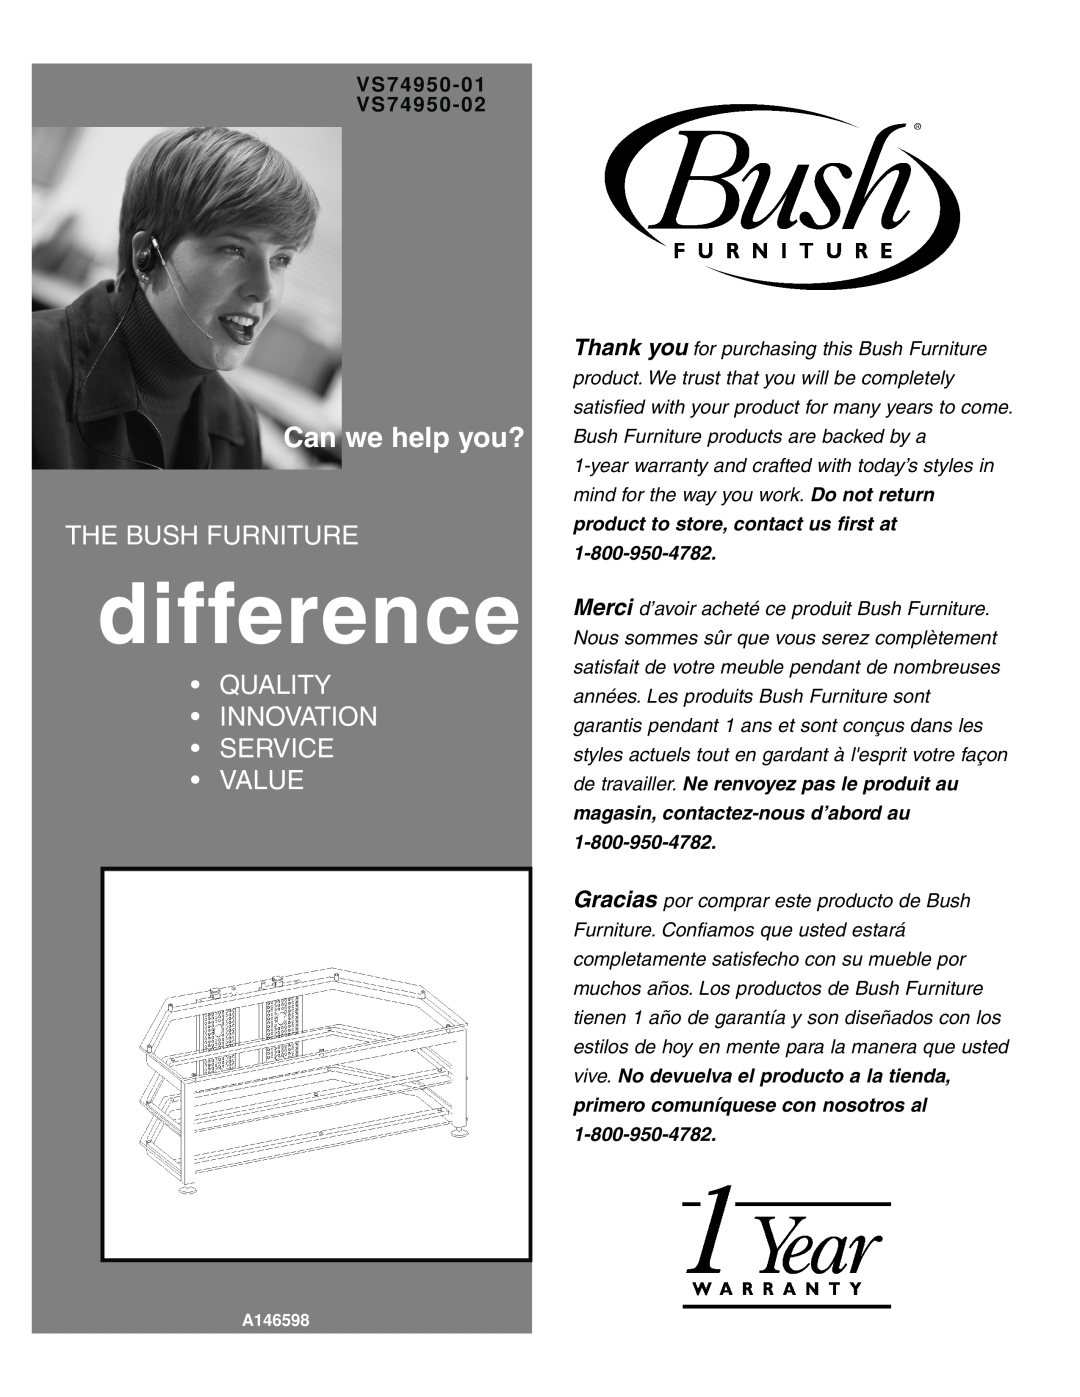 Bush warranty VS74950-01 VS74950-02, difference, Can we help you?, The Bush Furniture, Quality Innovation Service Value 